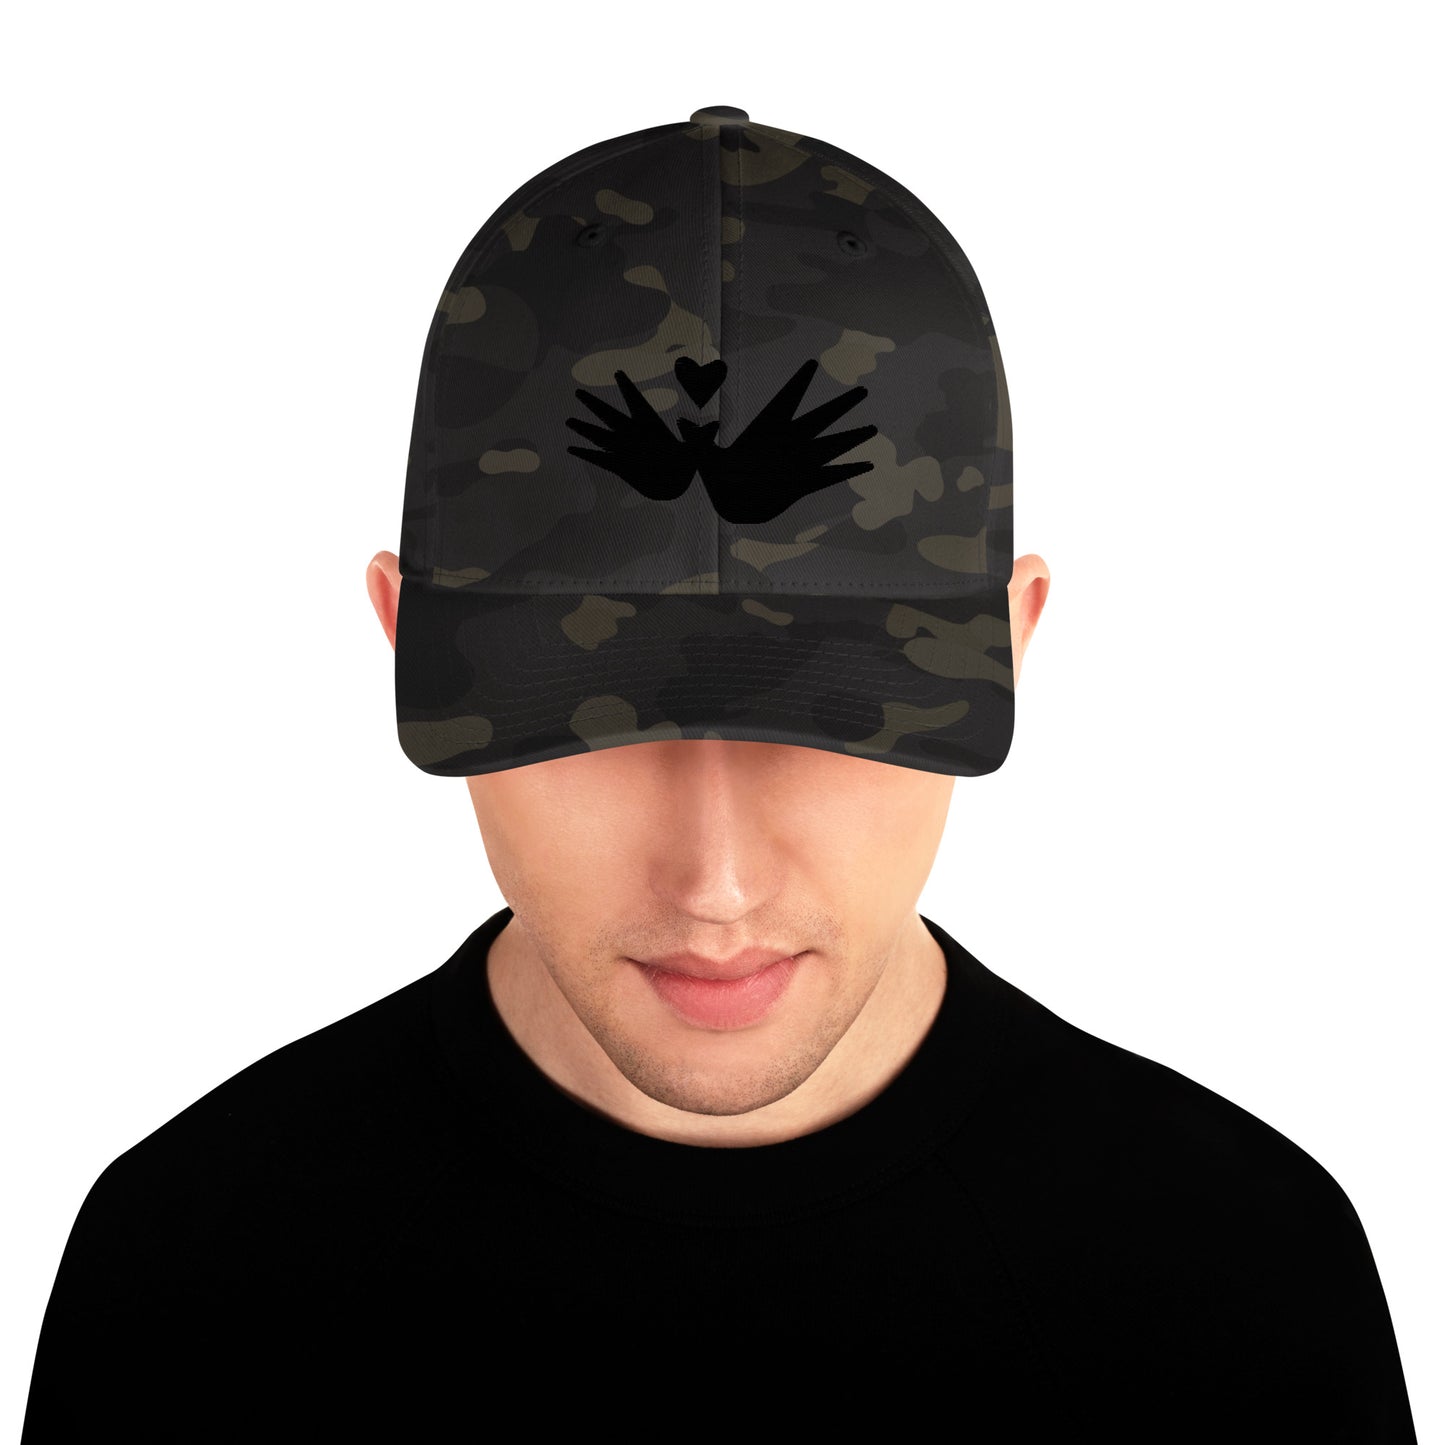 Williams Syndrome Association — Camo Hat